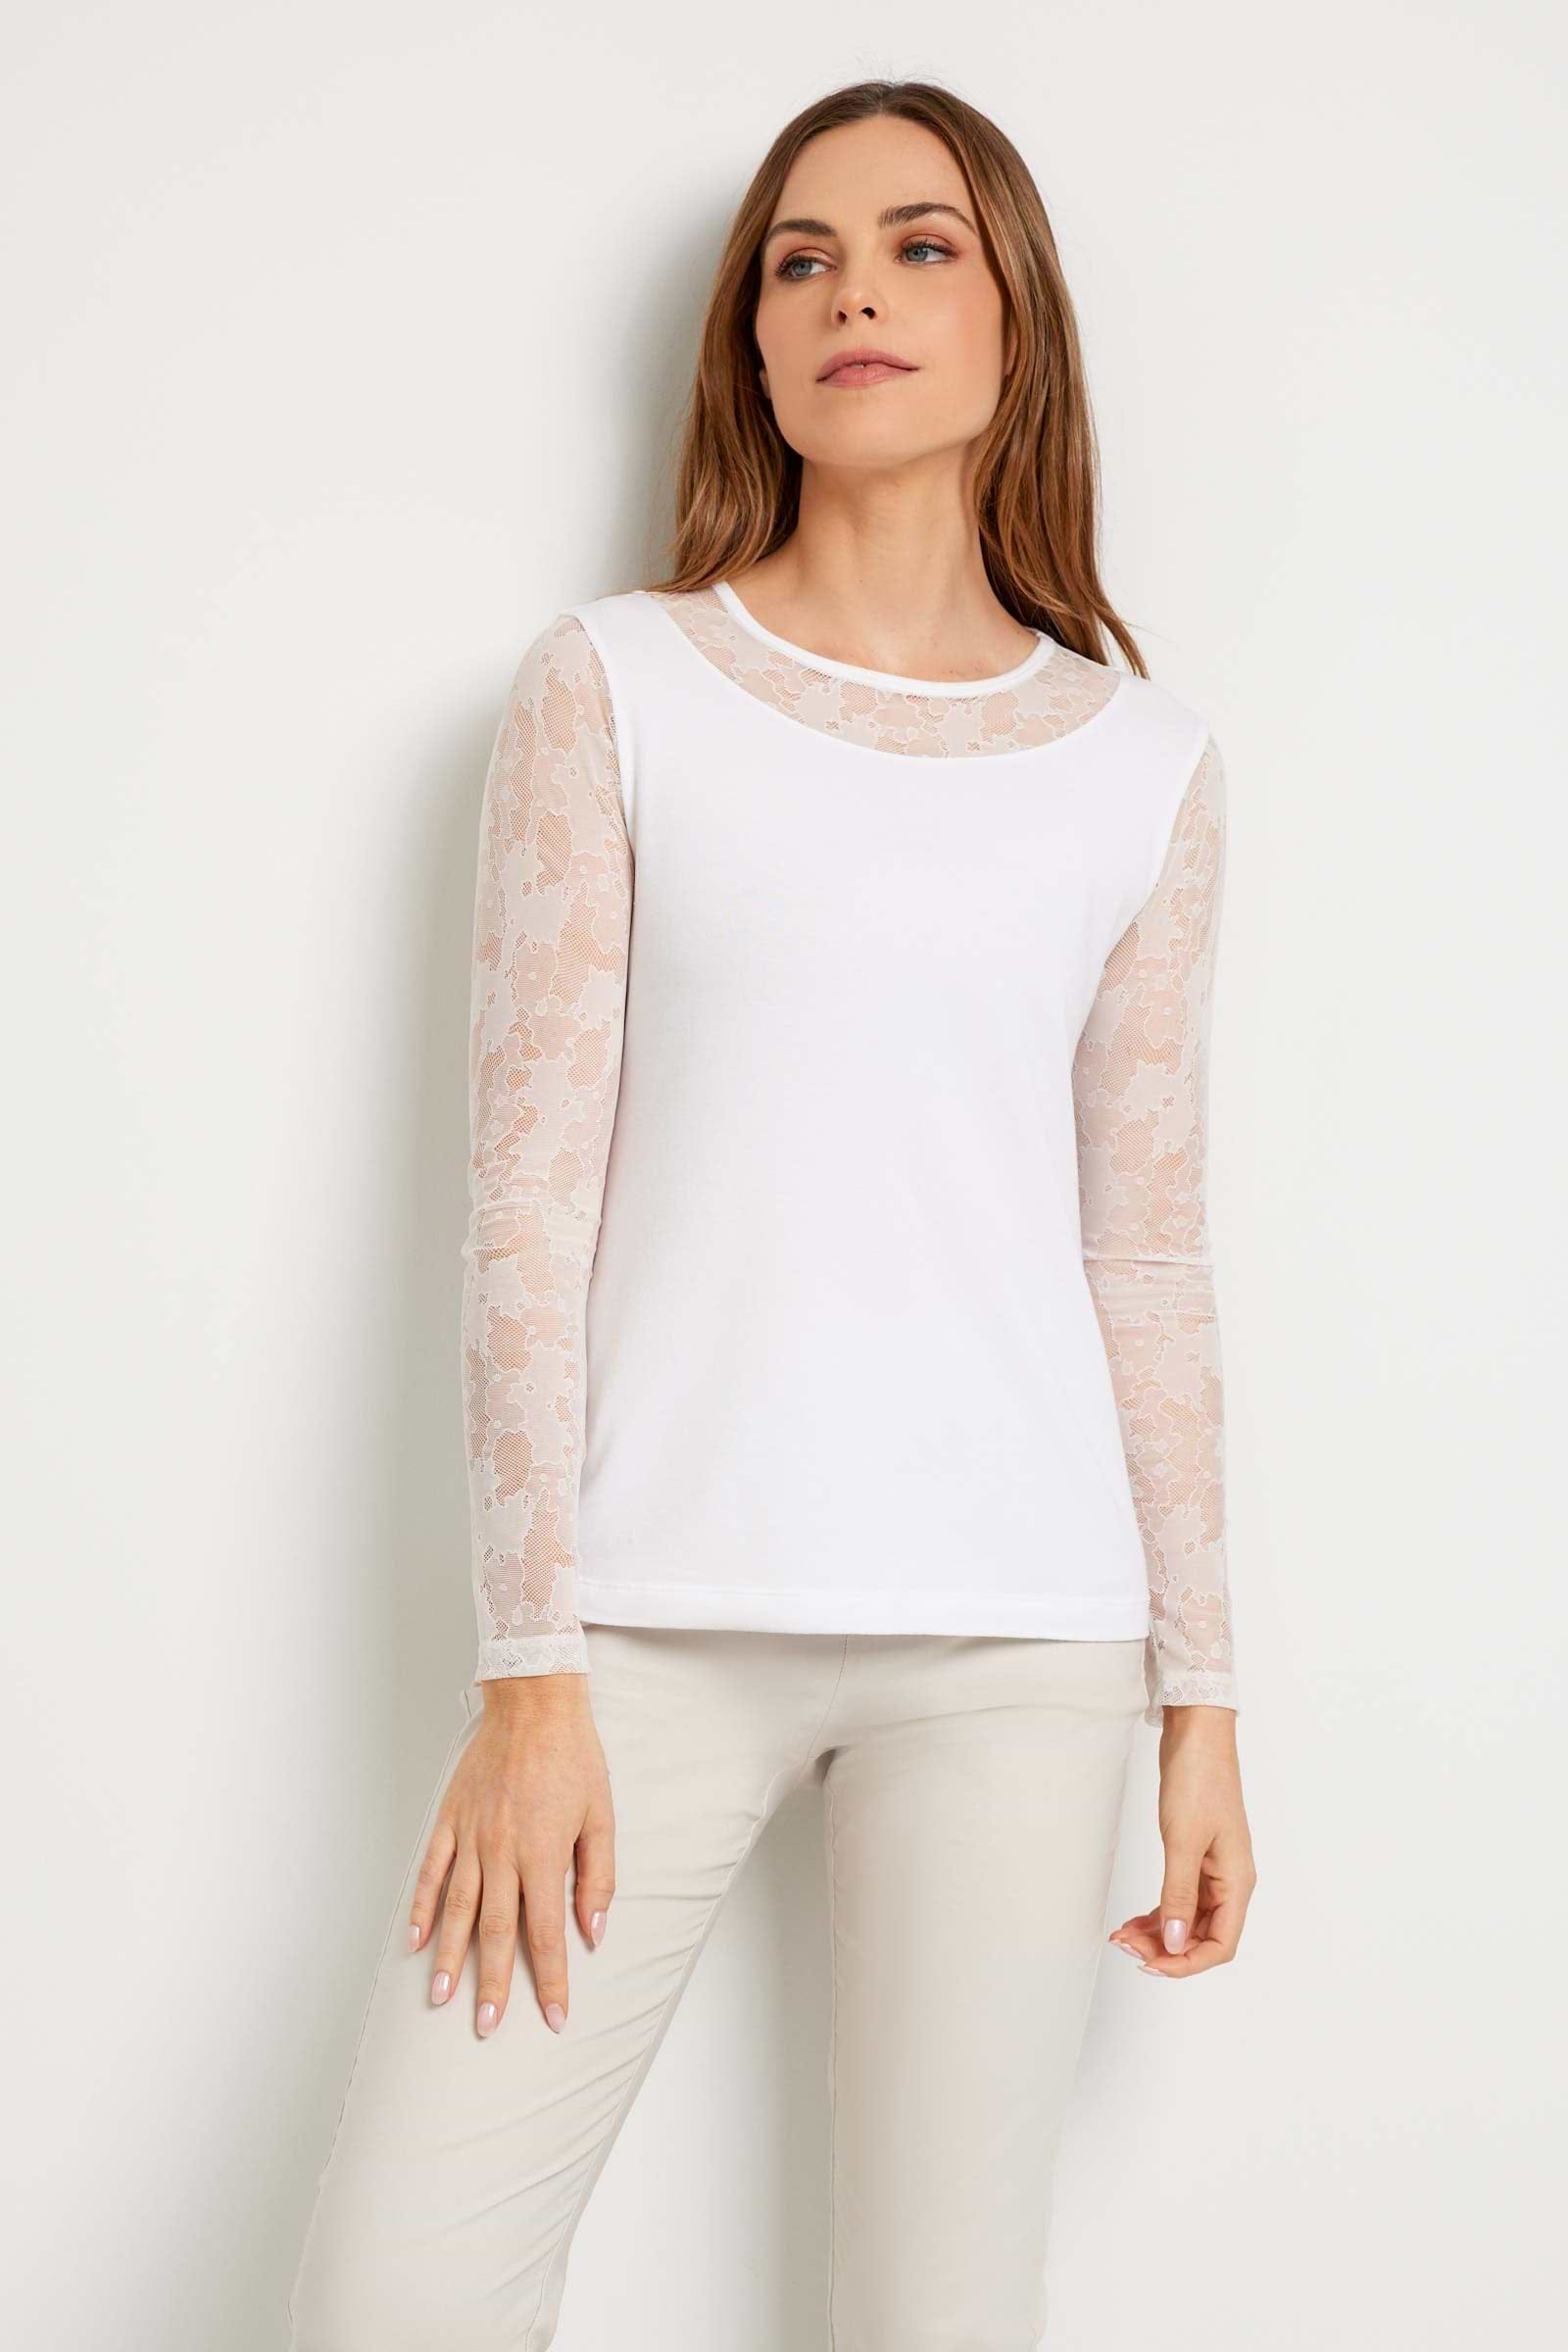 The Best Travel Top. Woman Showing the Front Profile of a Kim Camo Mesh Top in White.